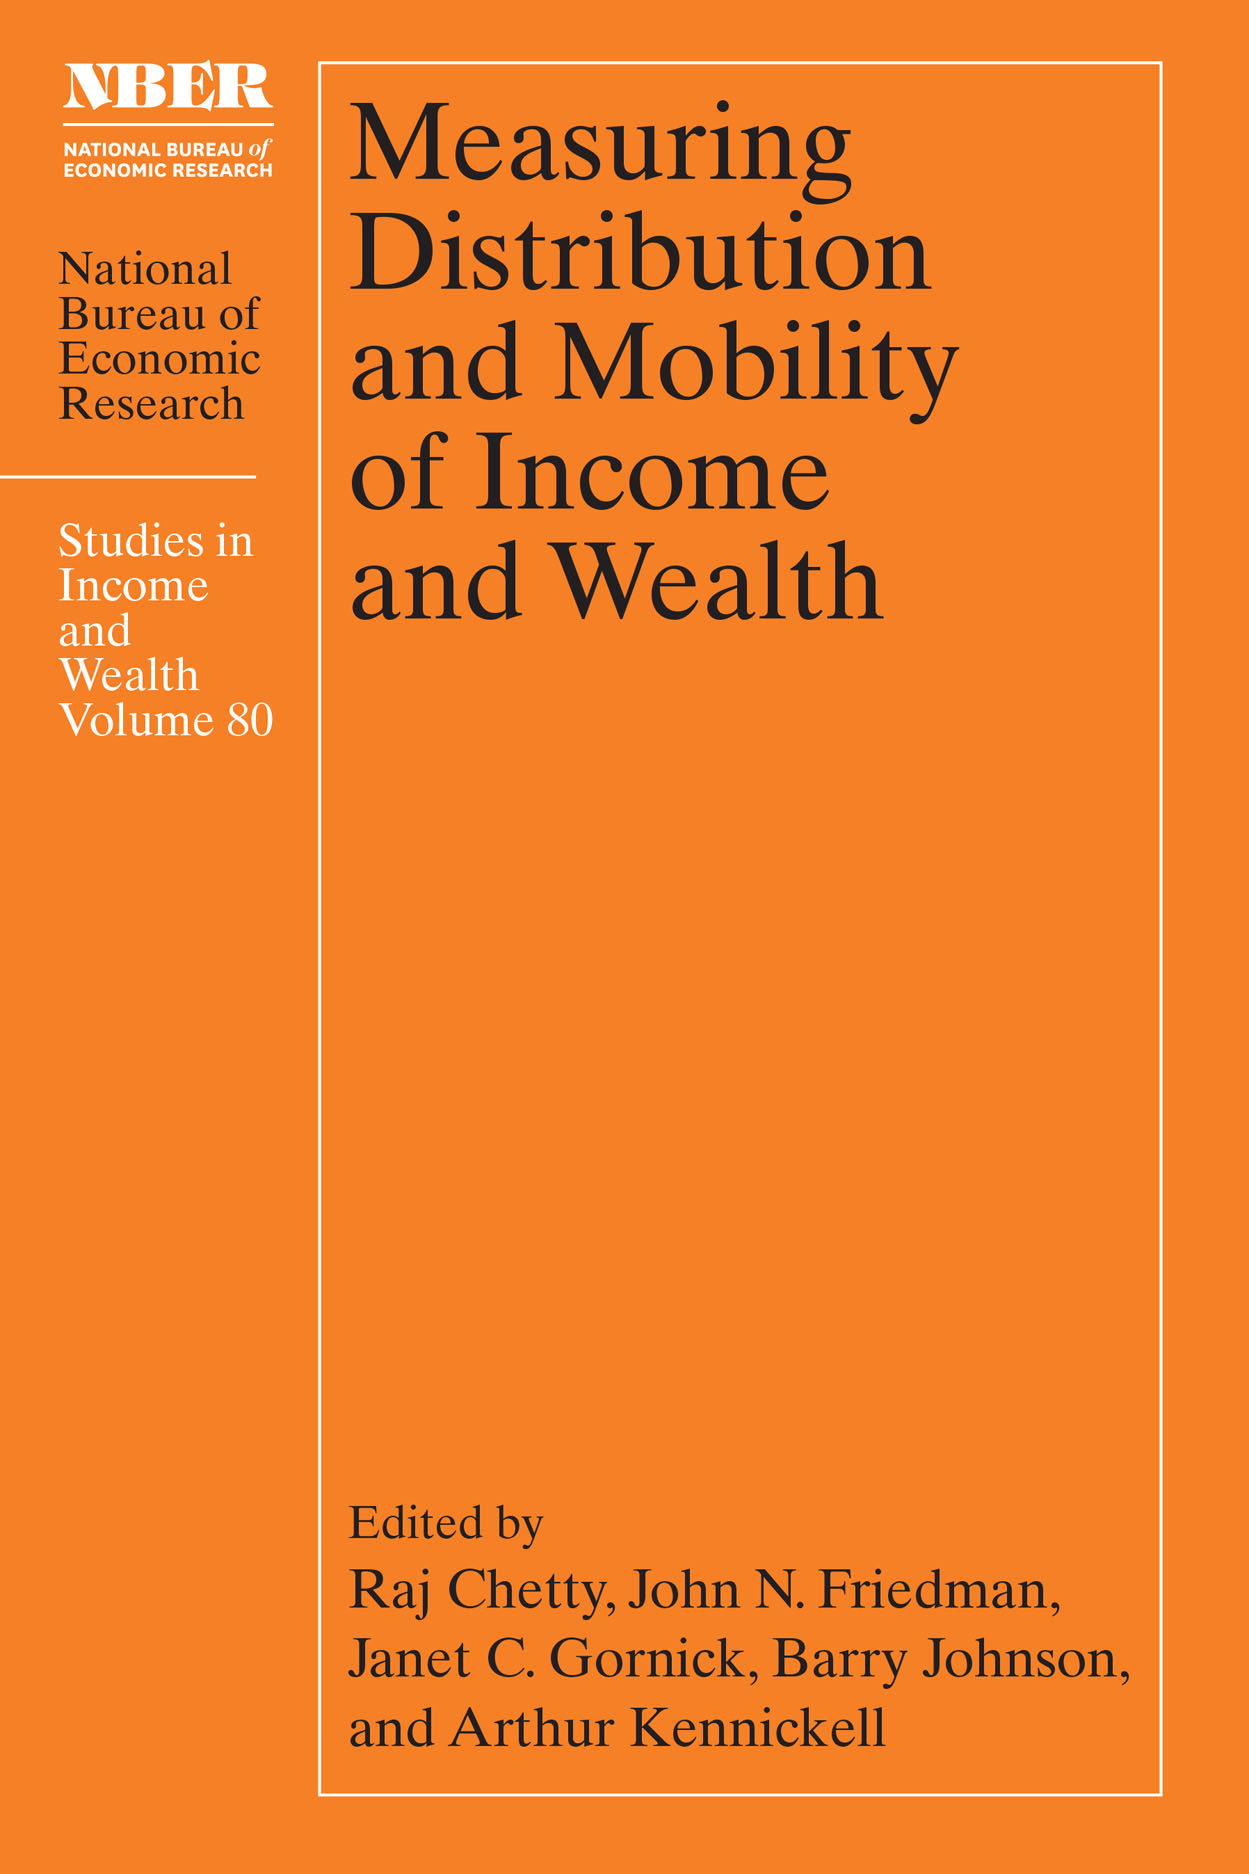 Inequality and mobility